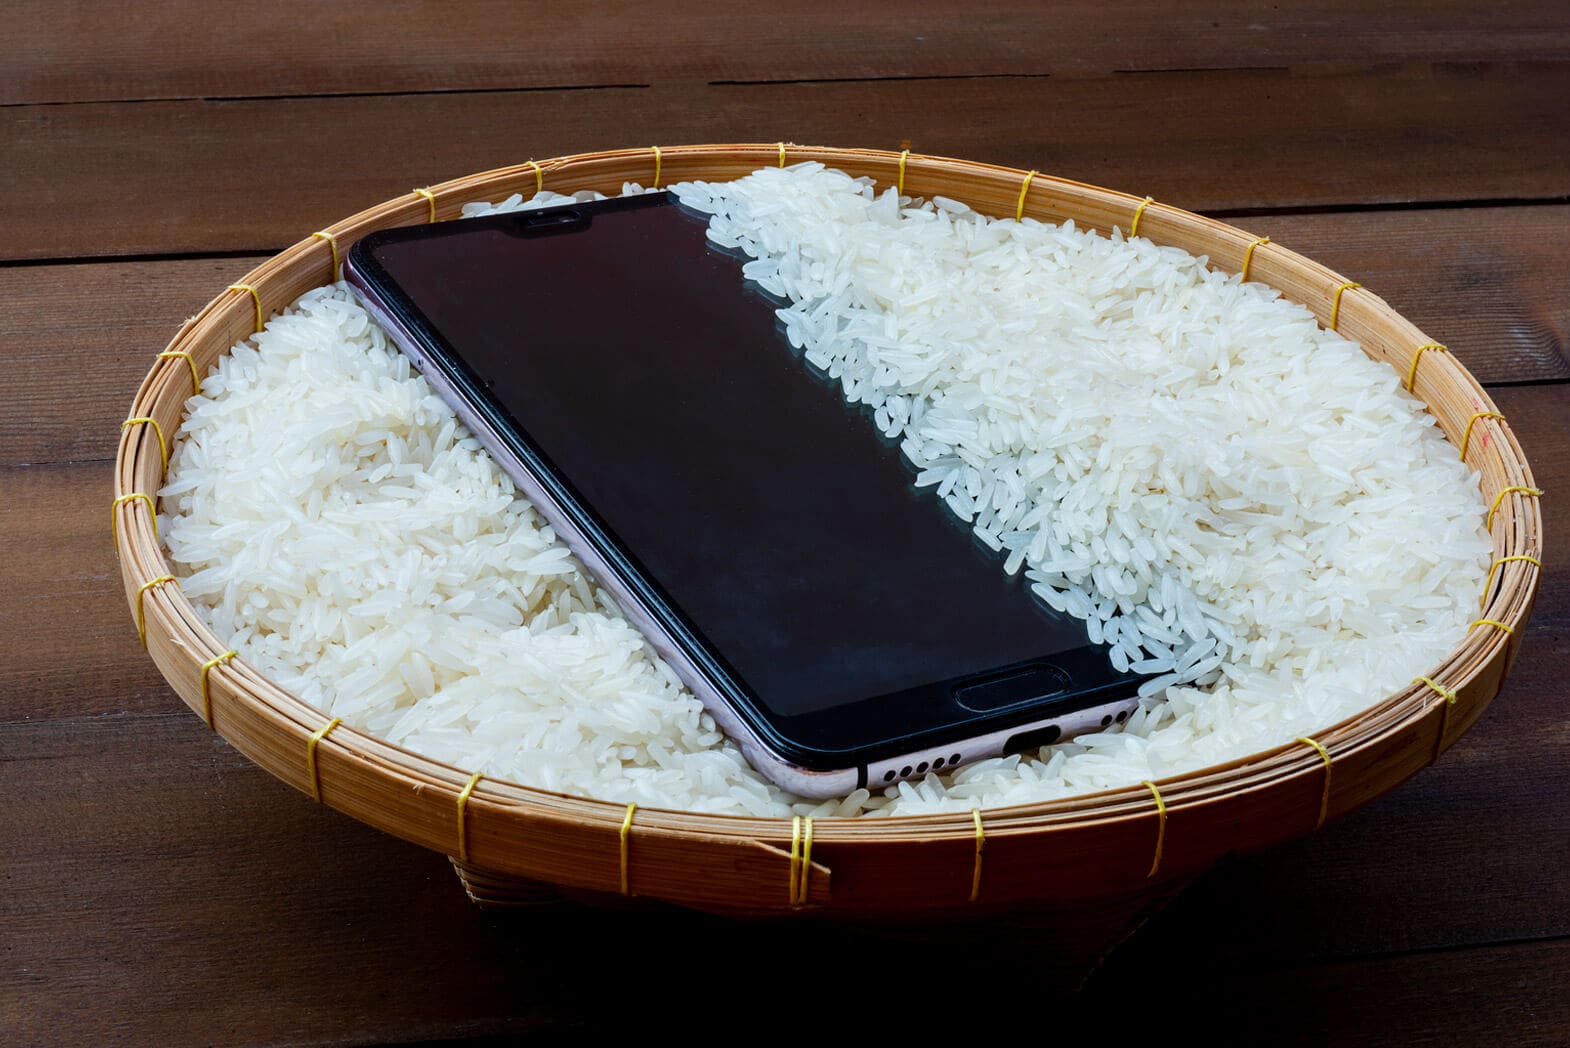 Phone in Rice – A Cautionary Tale